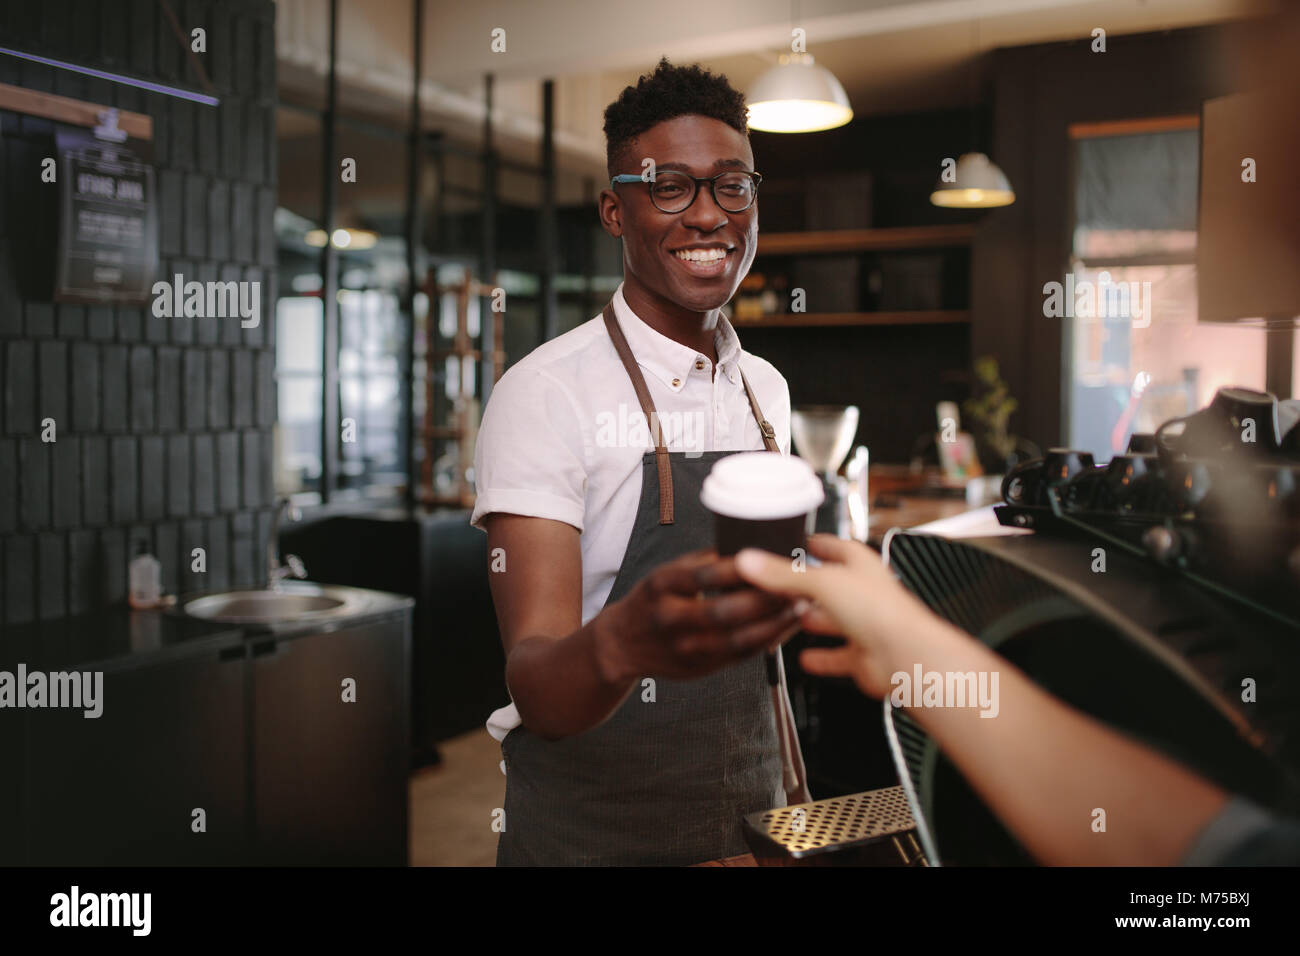 Coffee shop owner handing over a sealed coffee cup to a customer. Man serving customer with a smile at a coffee shop. Stock Photo